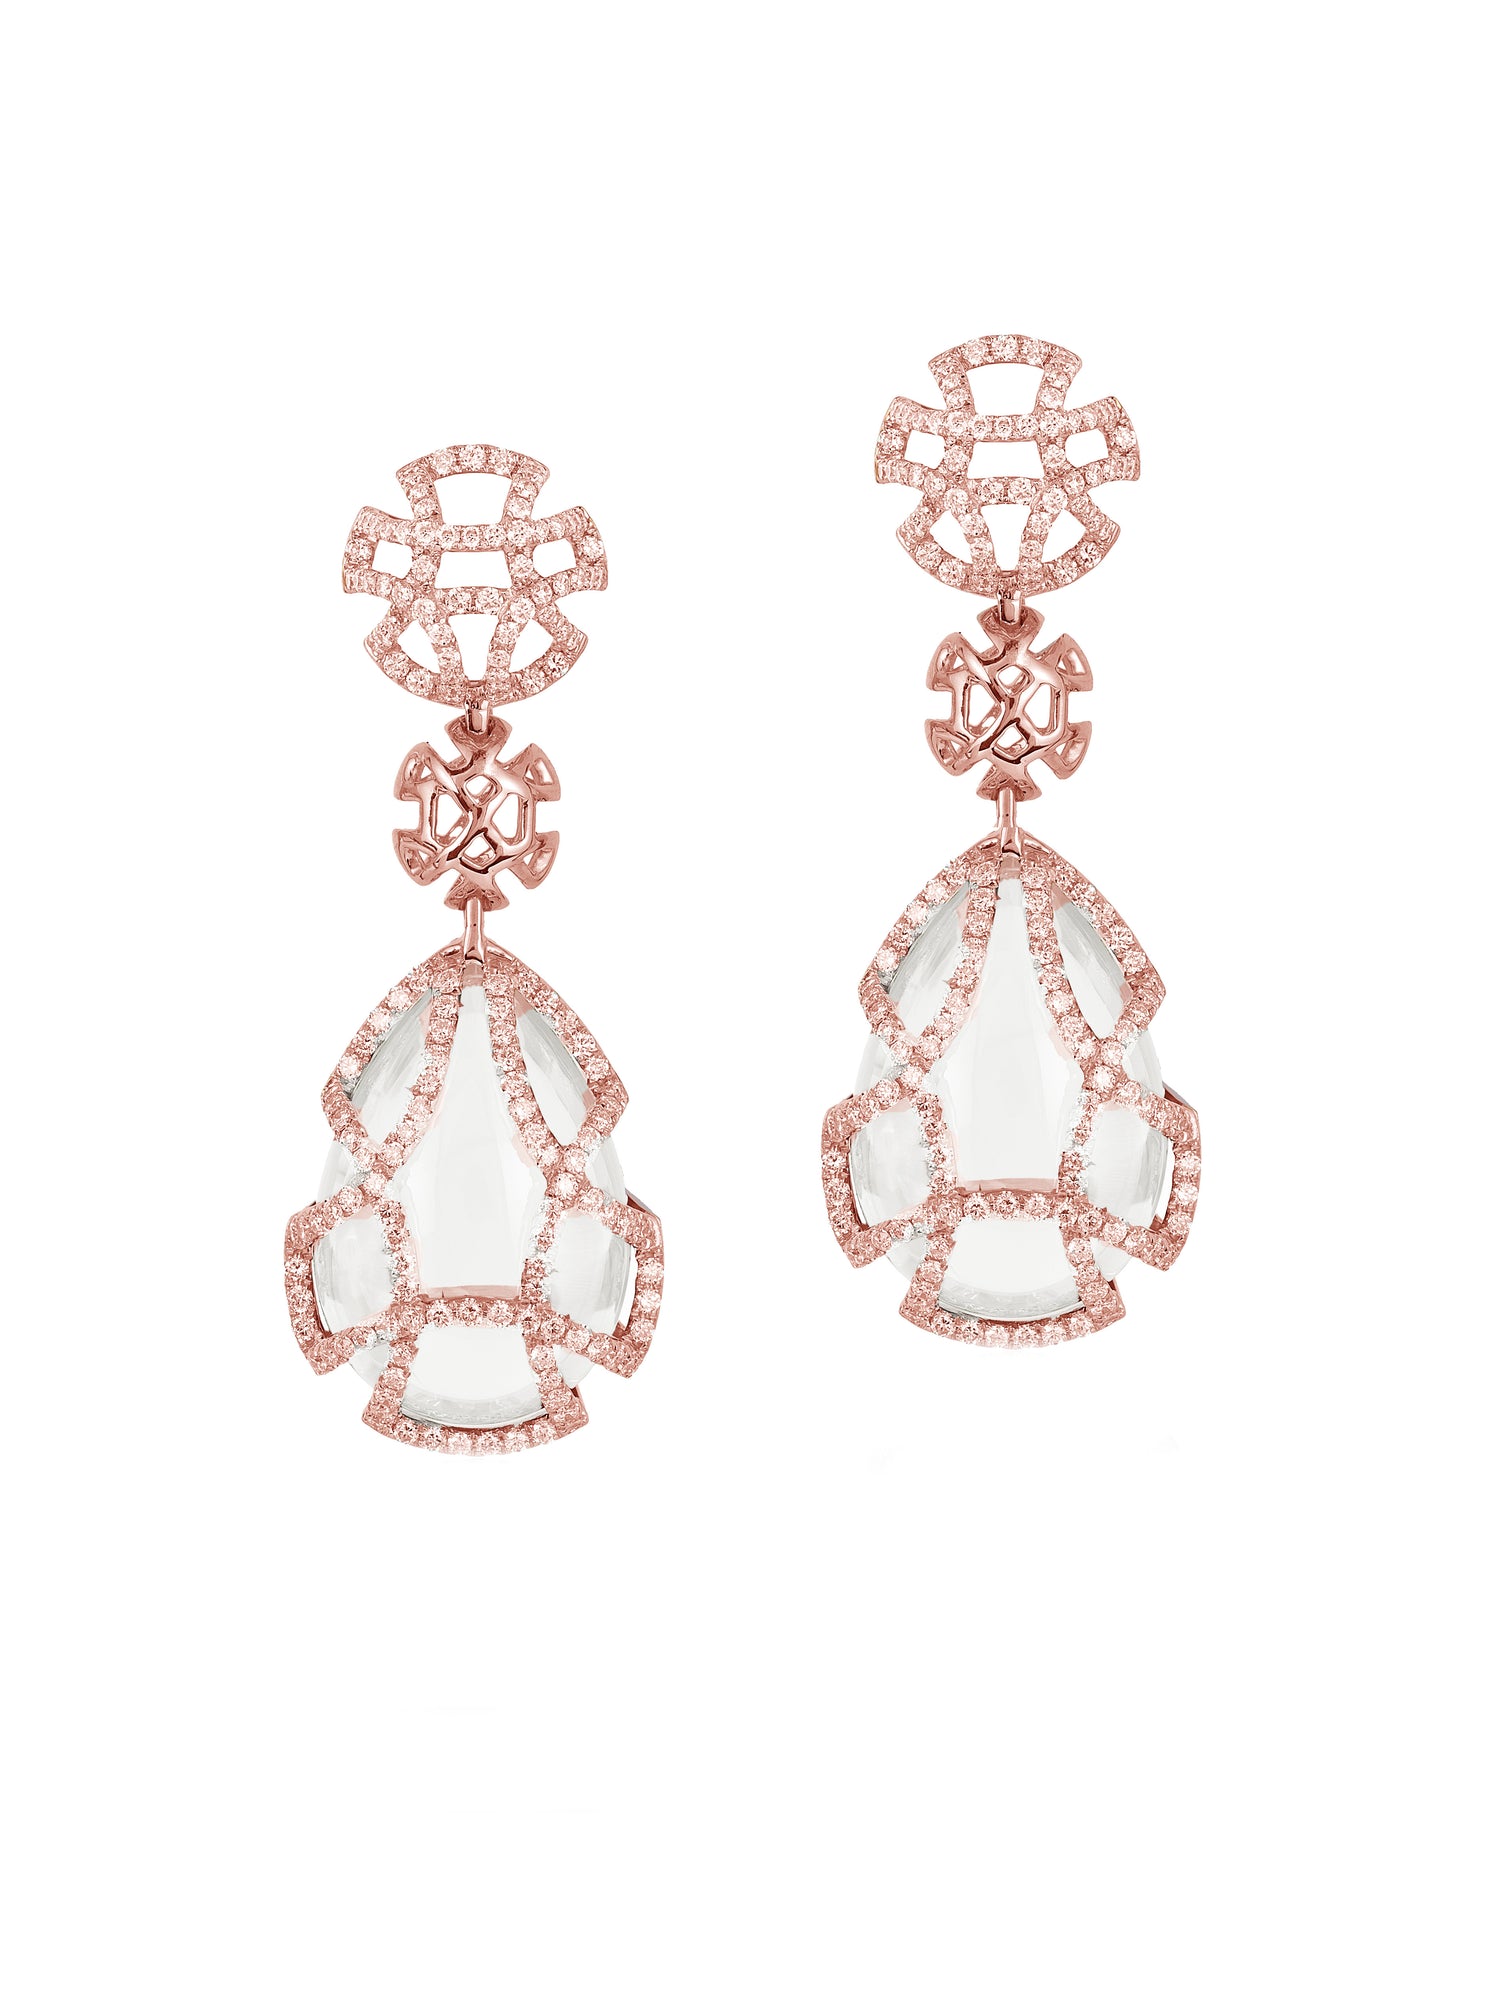 18K rose gold drop earrings with a pear-shaped rock crystal set in bands and embellished with diamonds